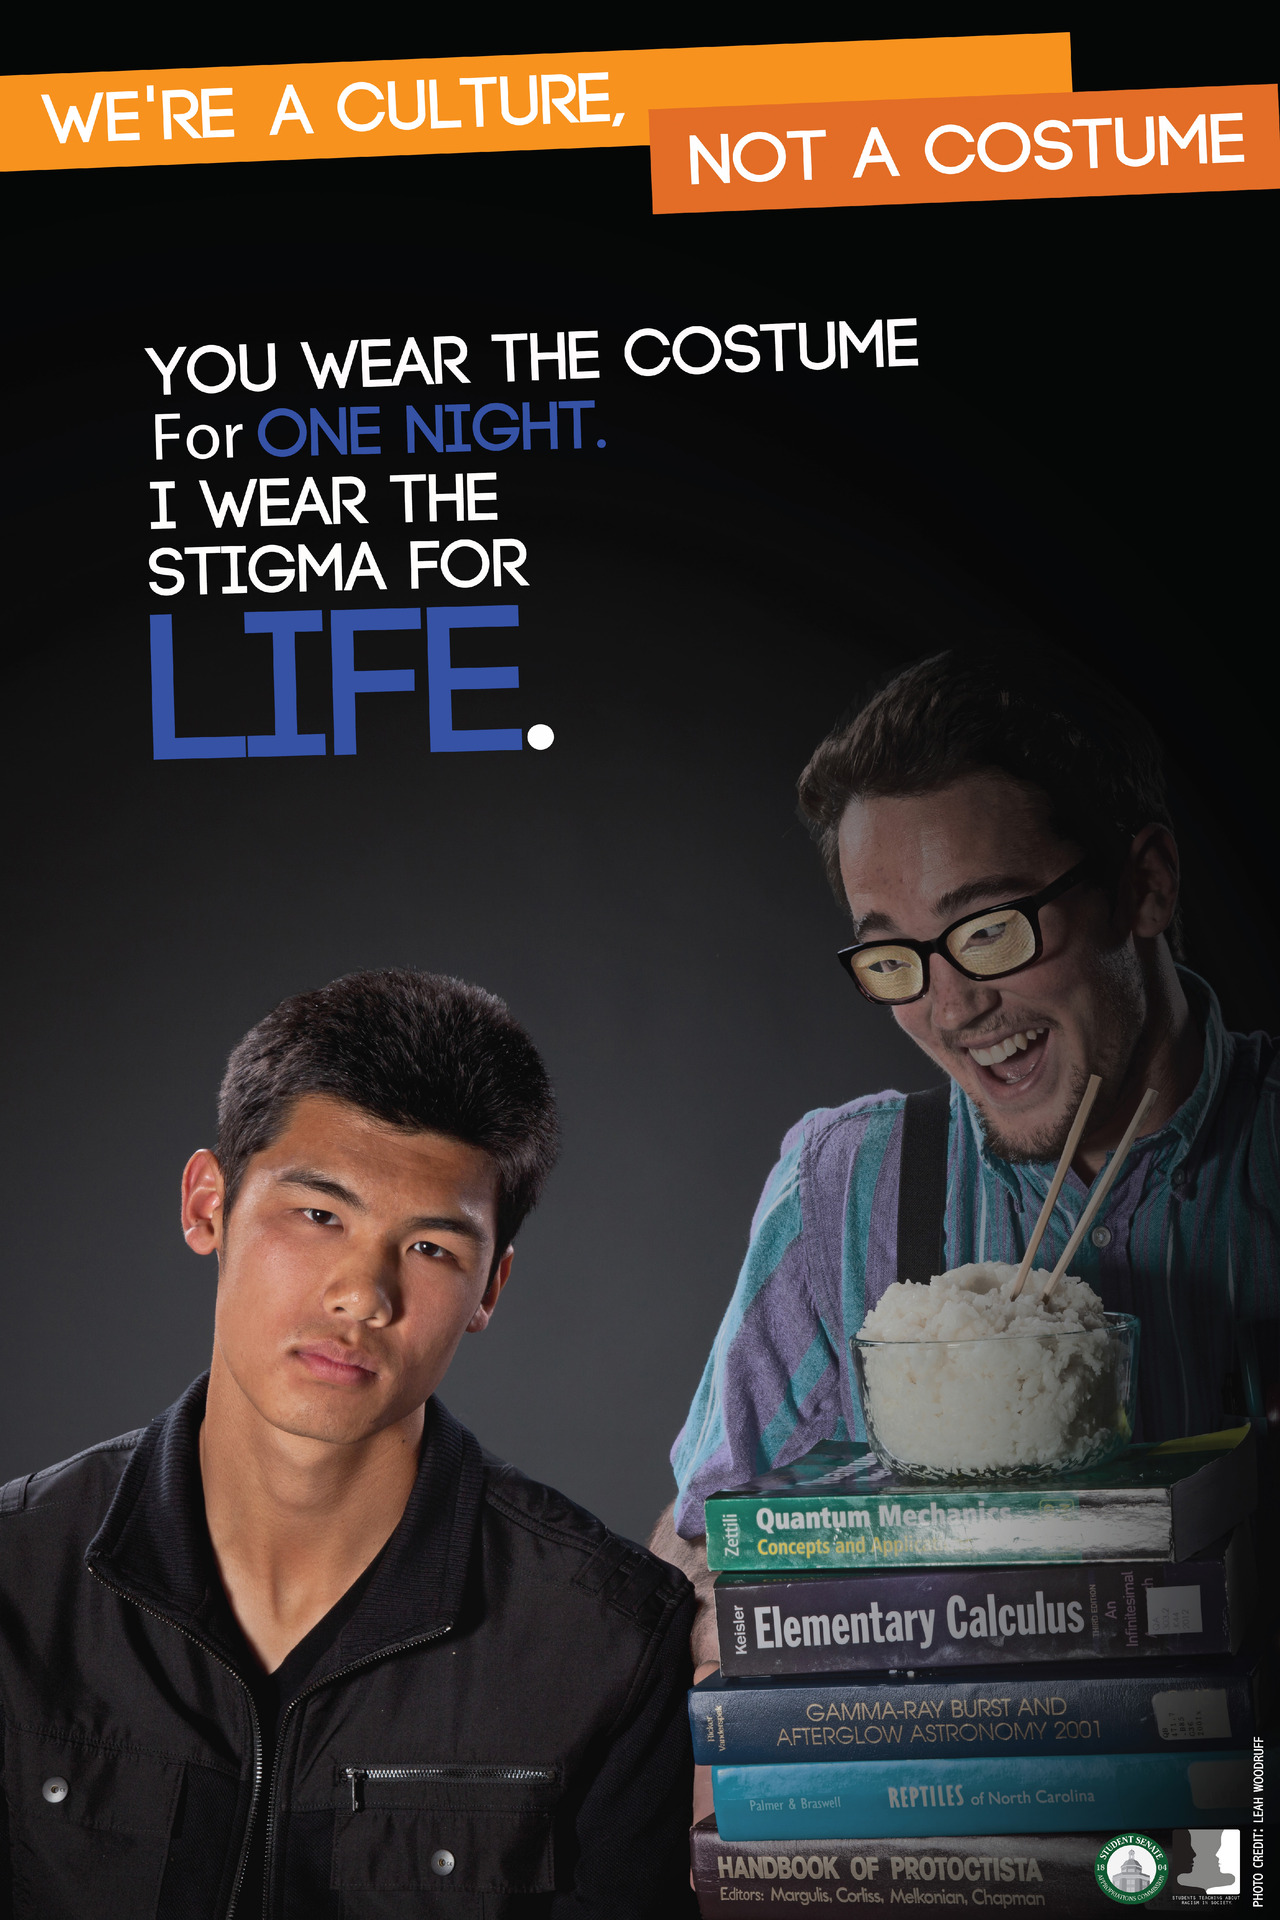 Remember to be politically correct this Halloween